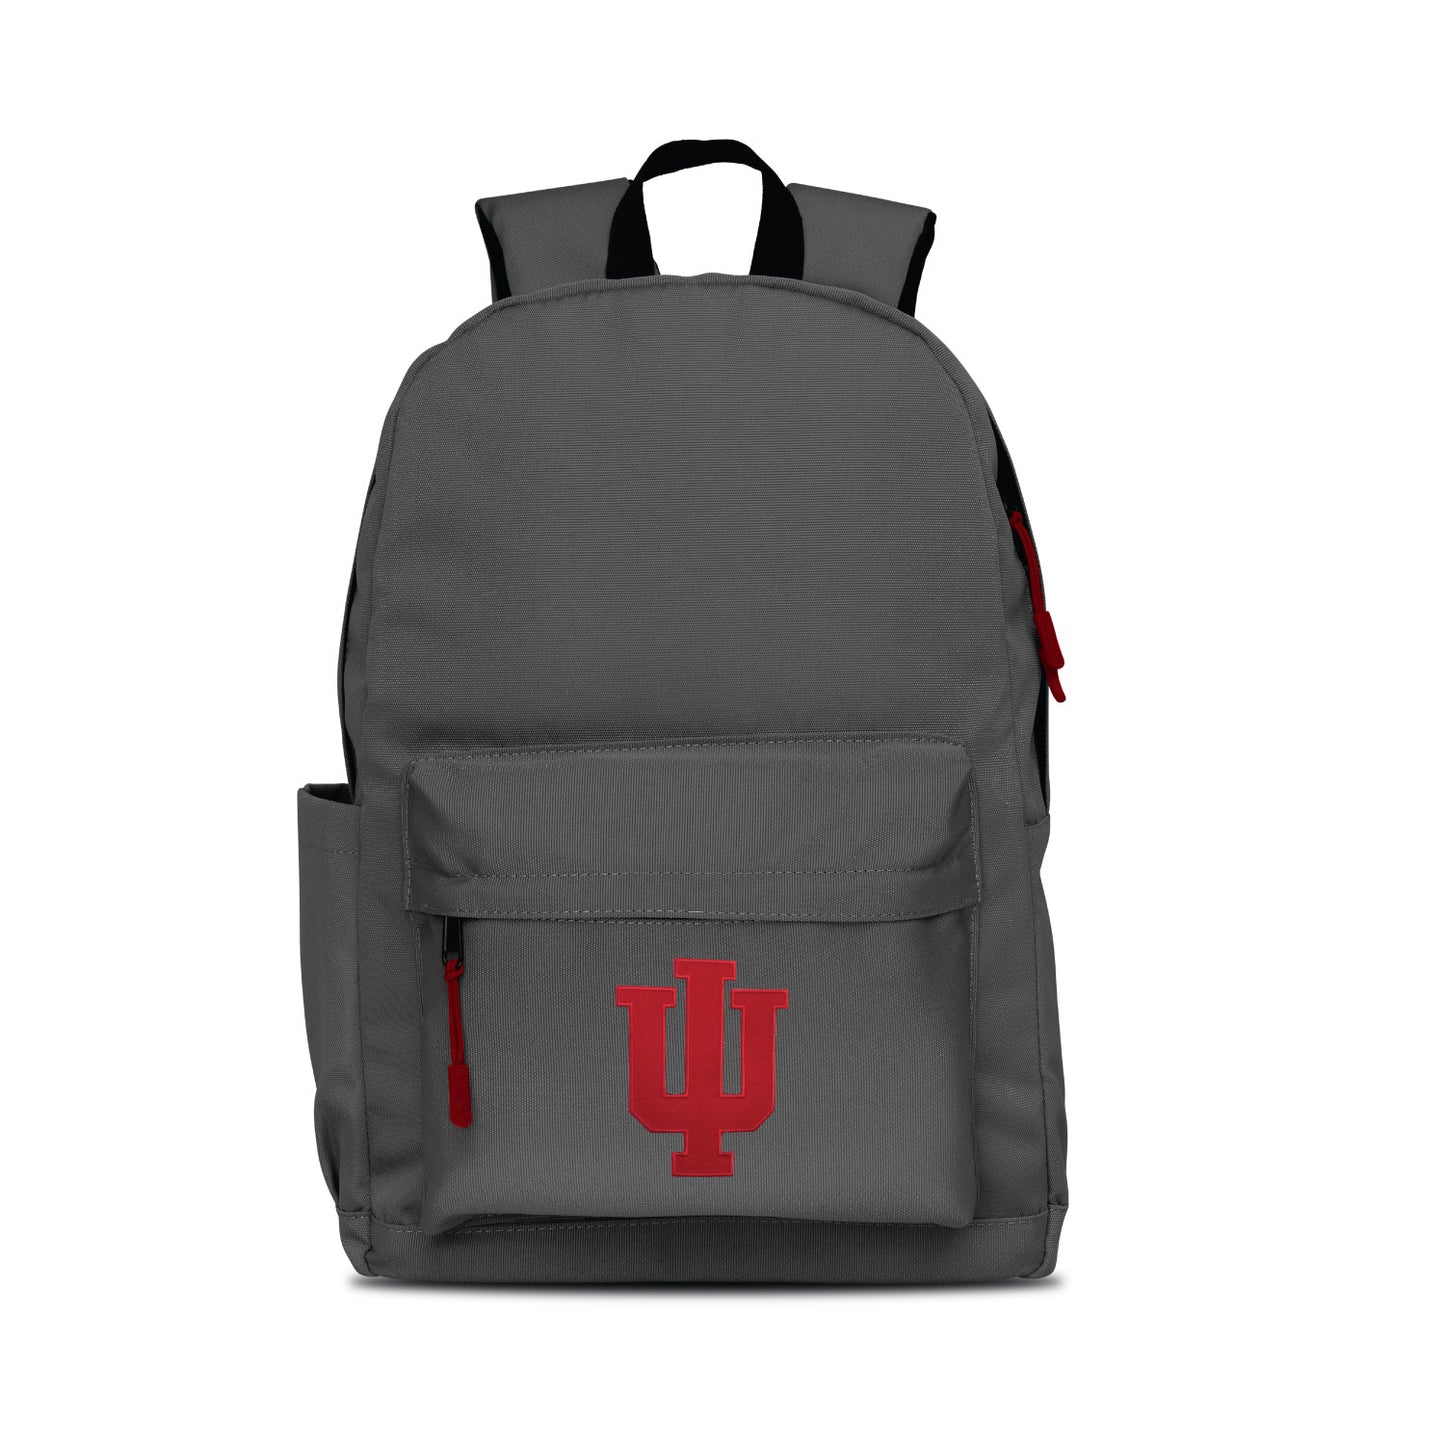 Indiana Campus Laptop Backpack- Gray